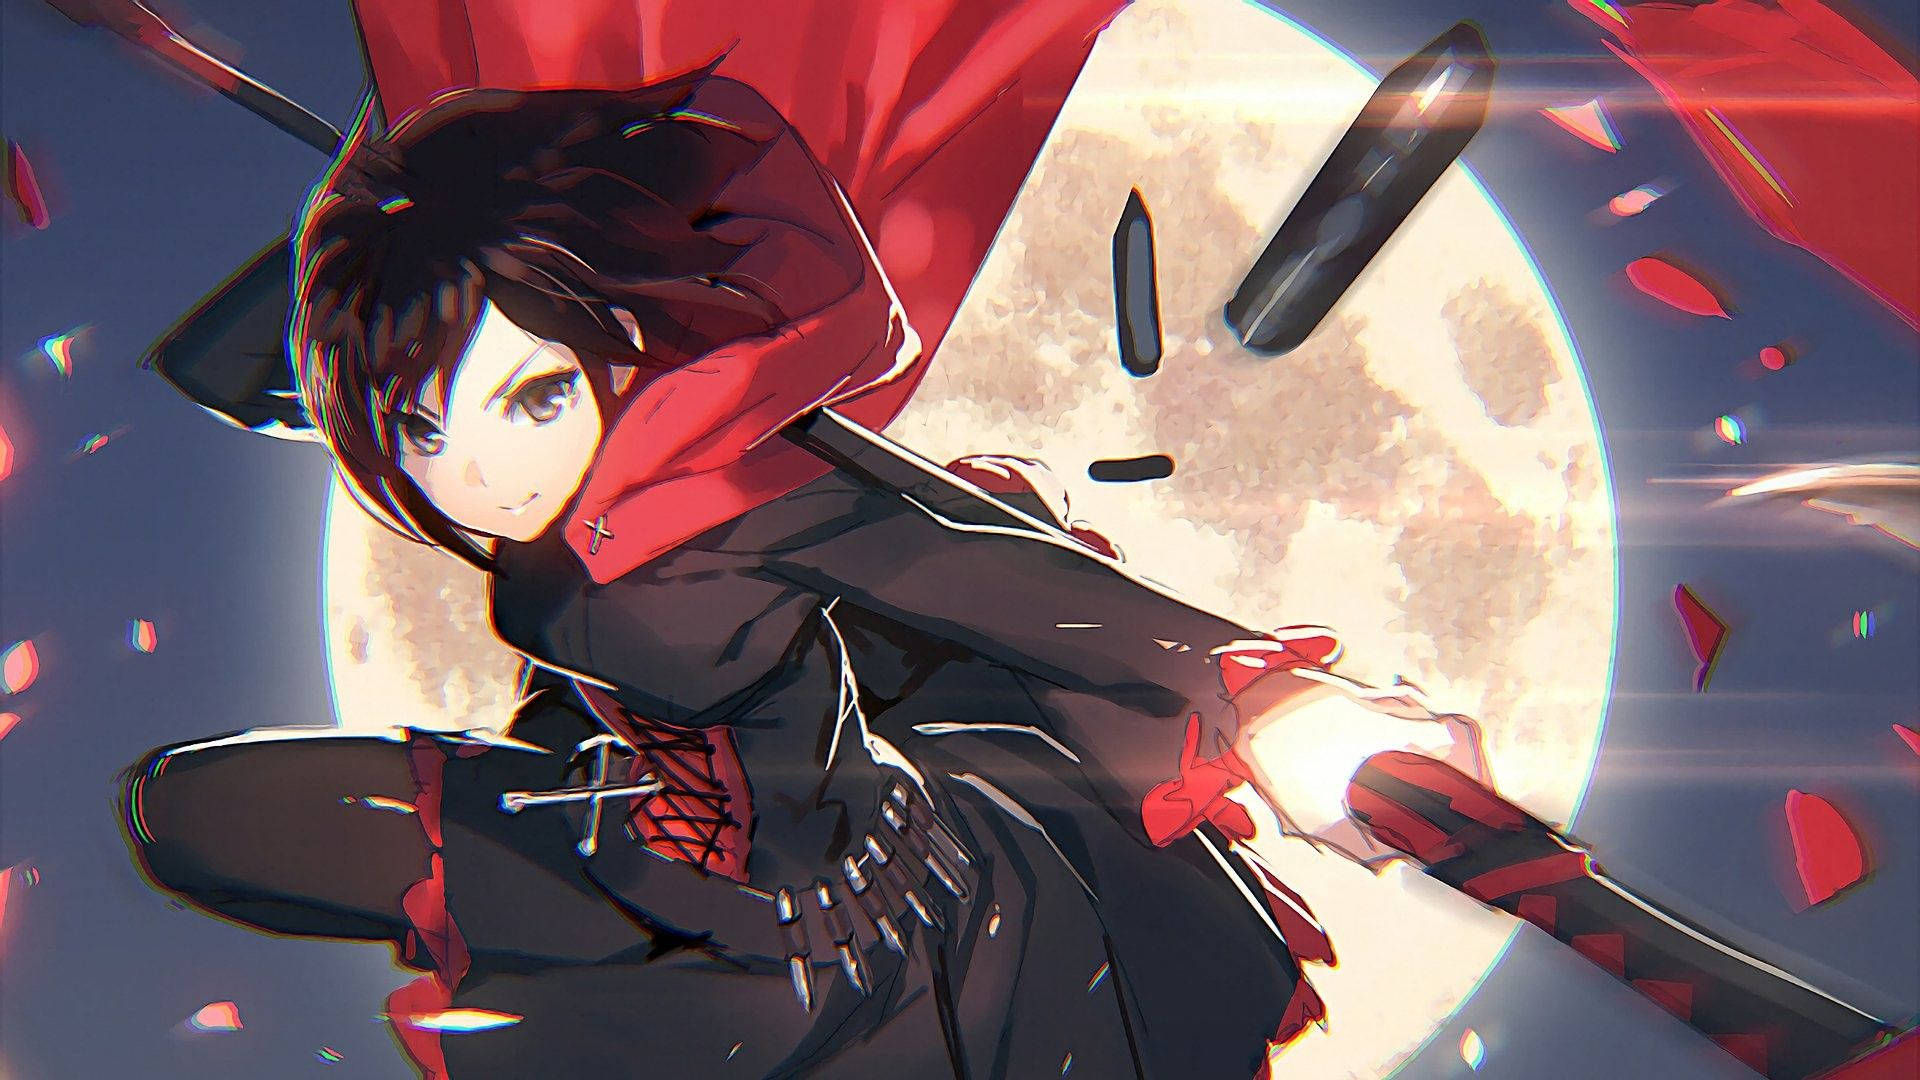 Rwby Ruby Rose Mid-action Fight Background